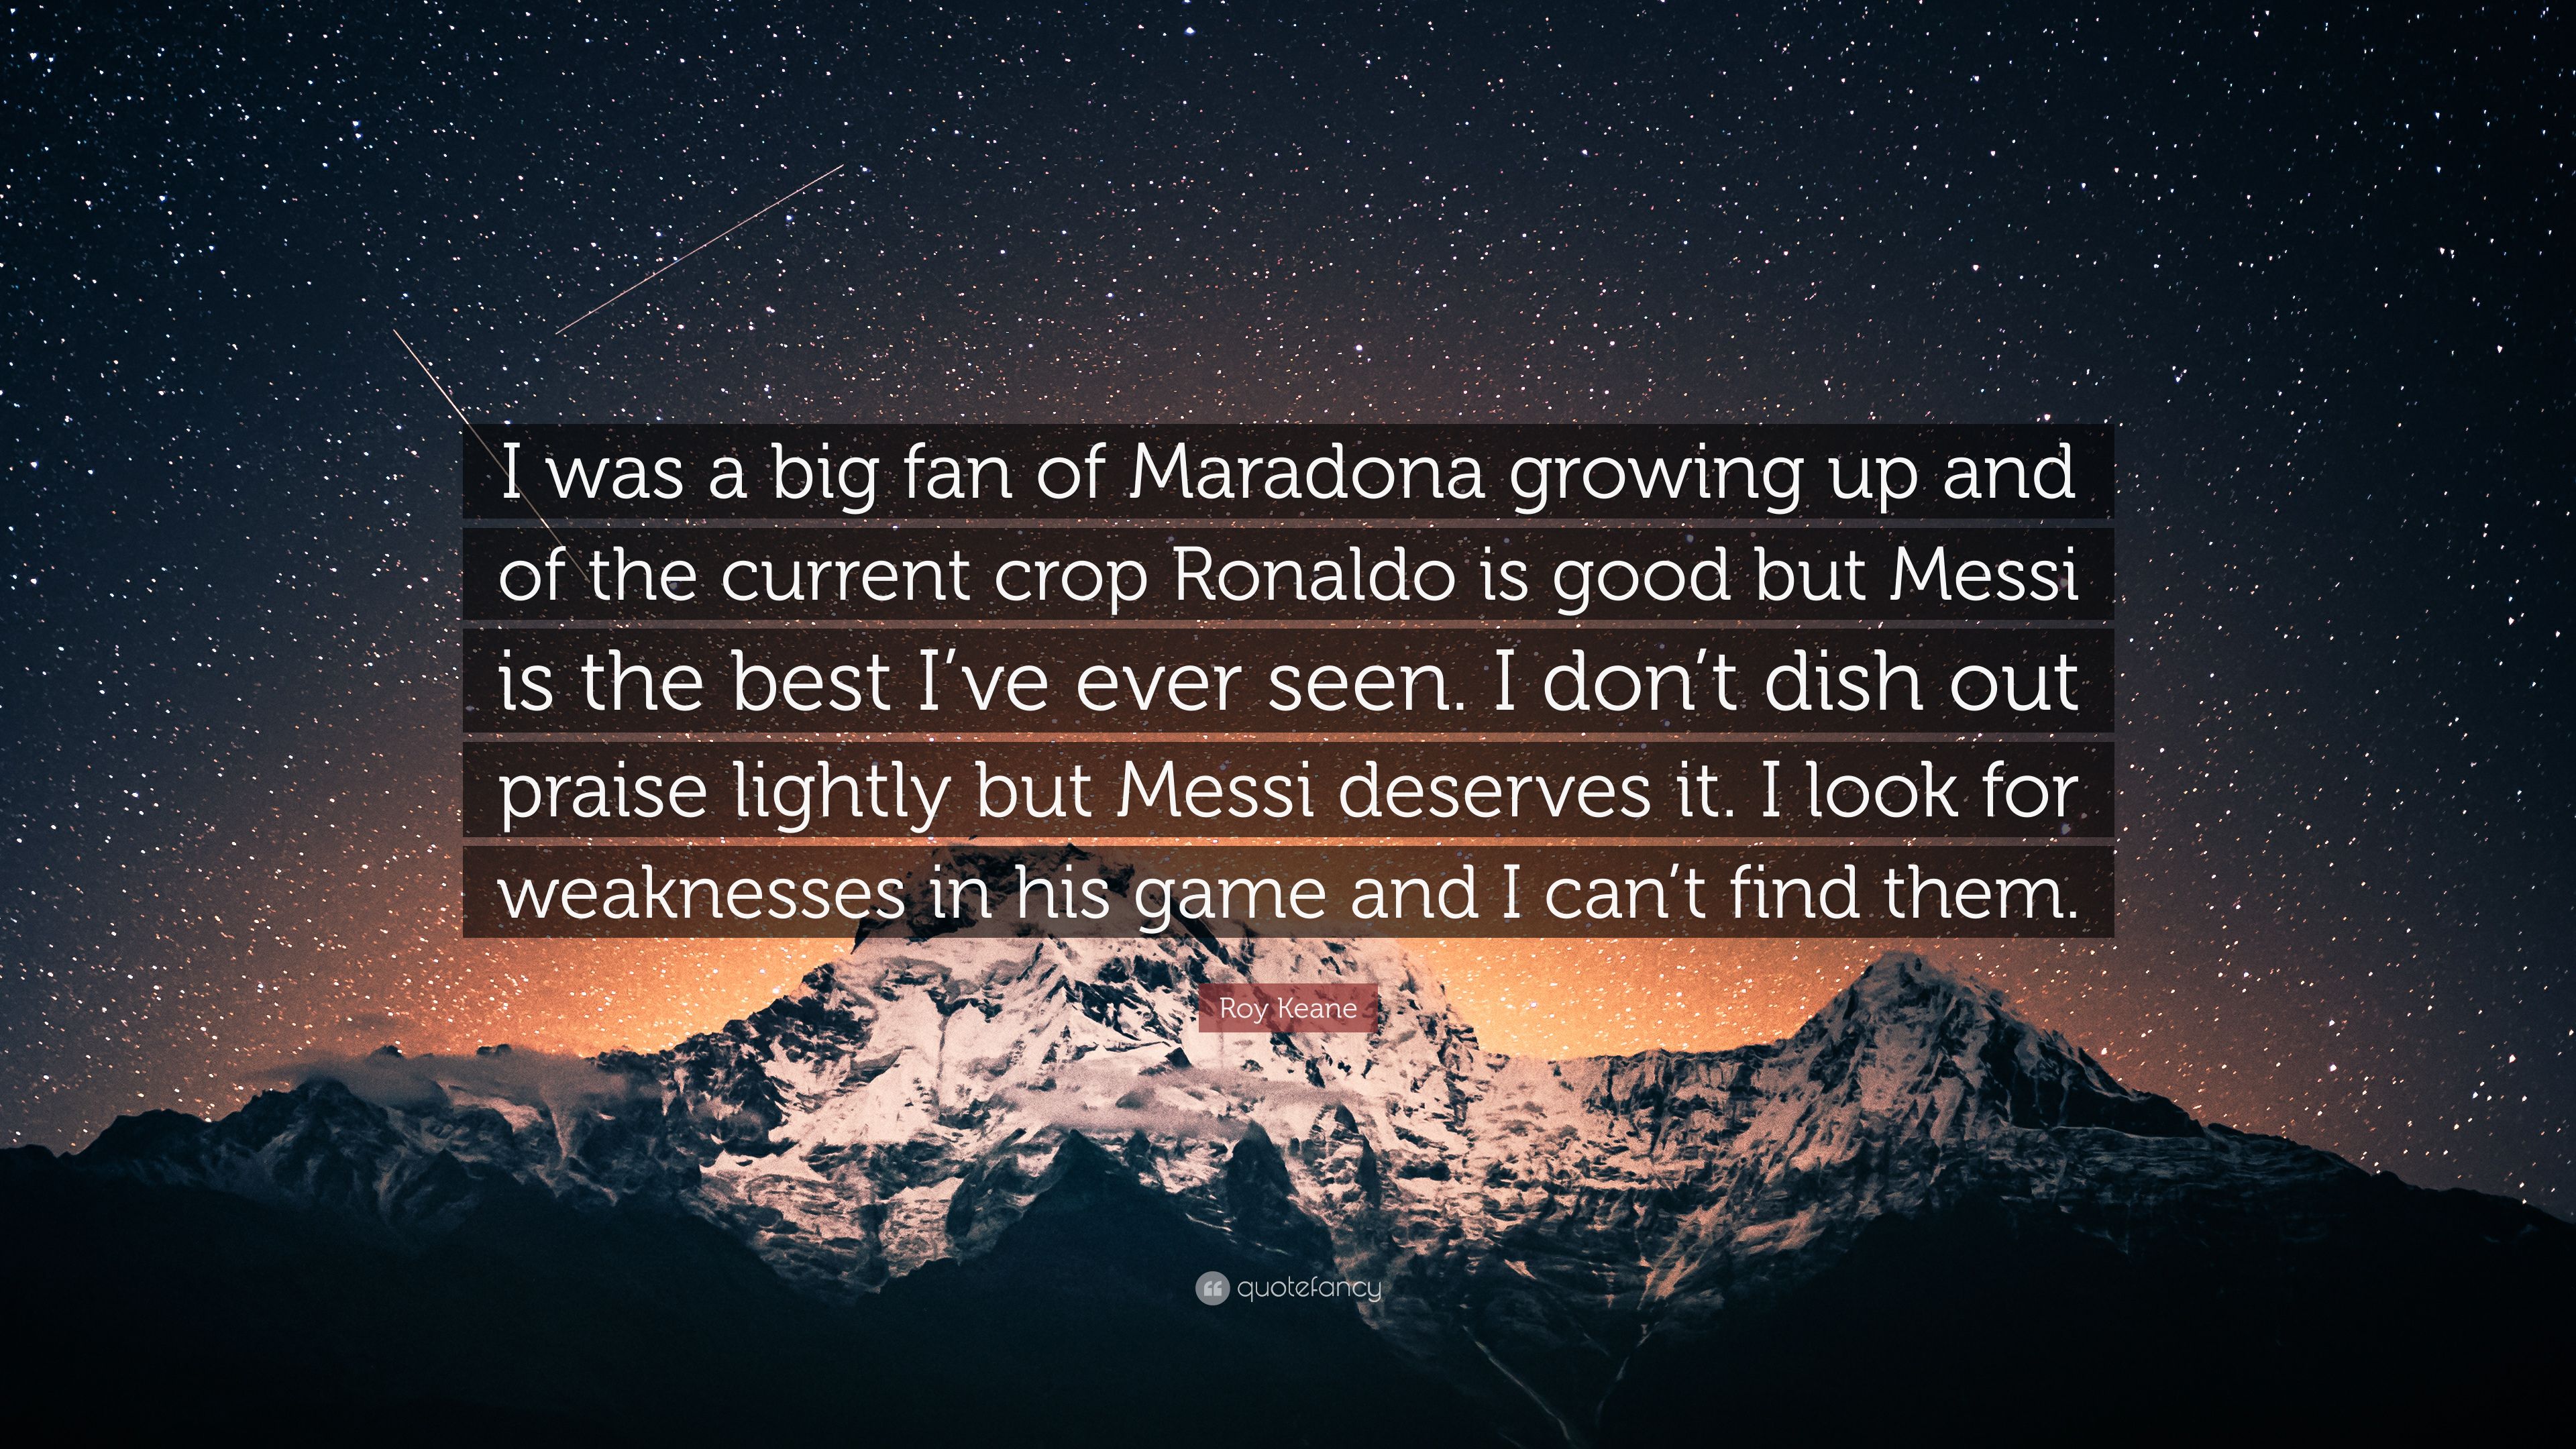 Roy Keane Quote: “I was a big fan of Maradona growing up and